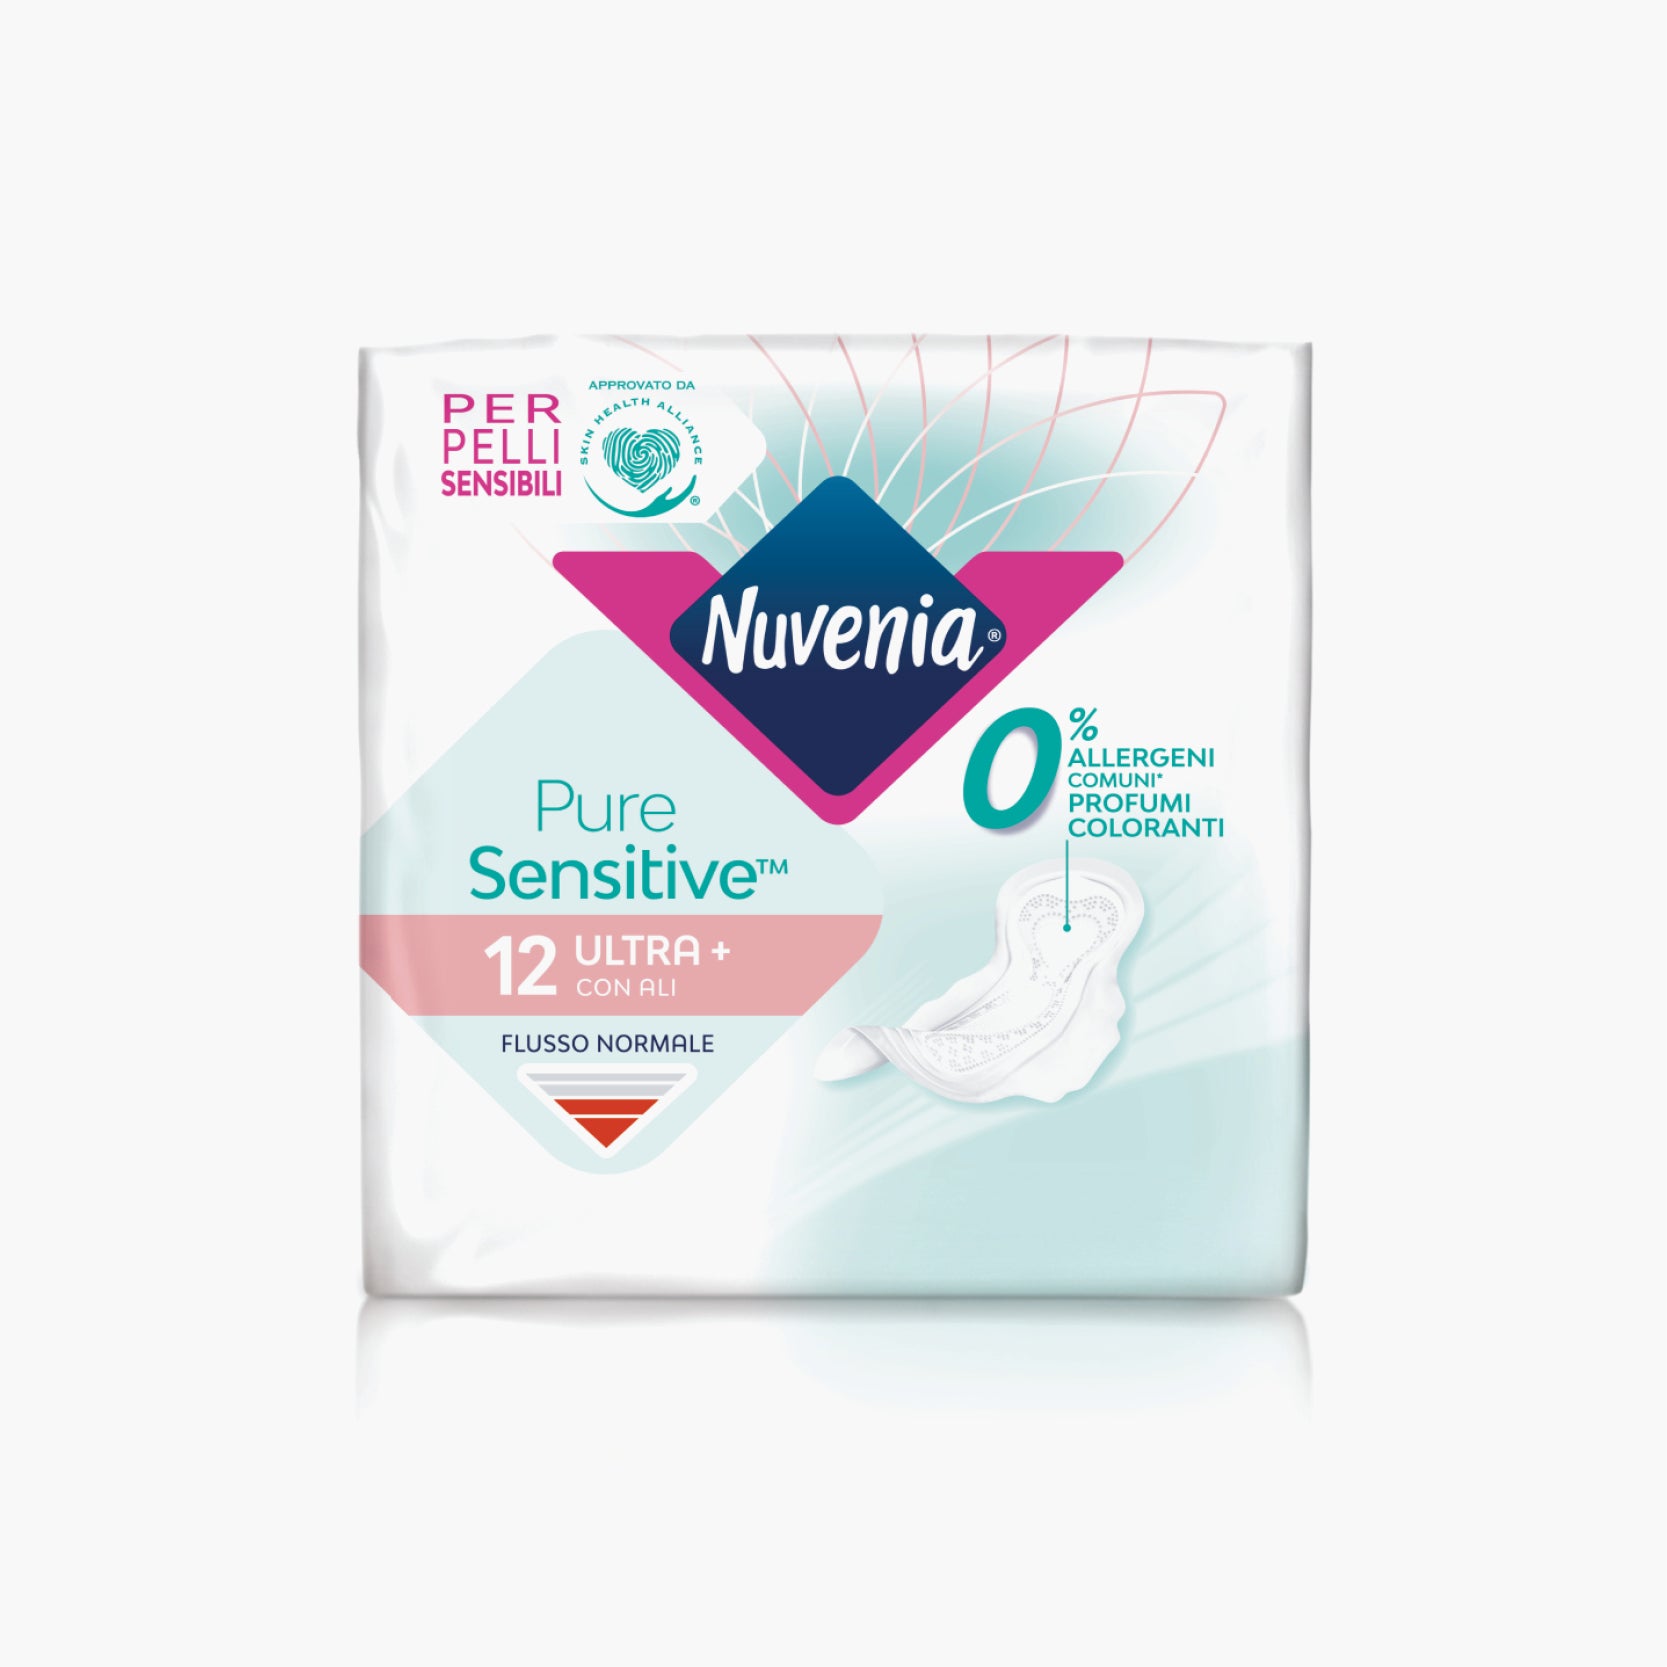 Nuvenia Sottile Night Pads with Wings 10pcs - 15% OFF – MUST_HAVES MALTA